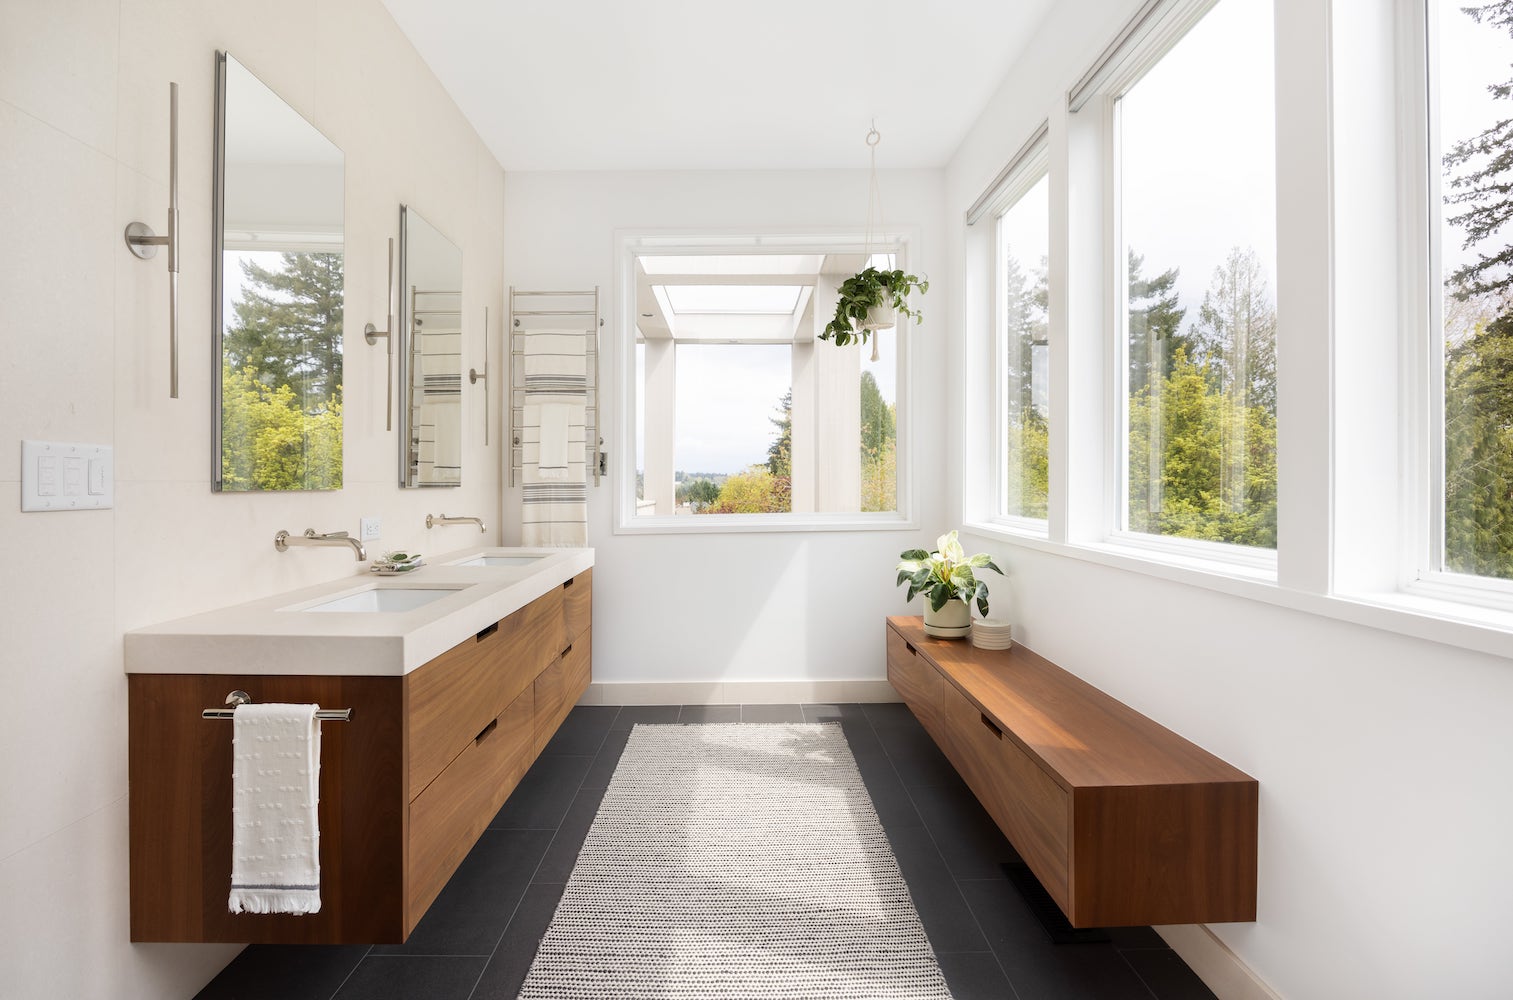 Bathroom with floating mahogany cabinetry, finger pulls, hanging plant, Kush runner rug